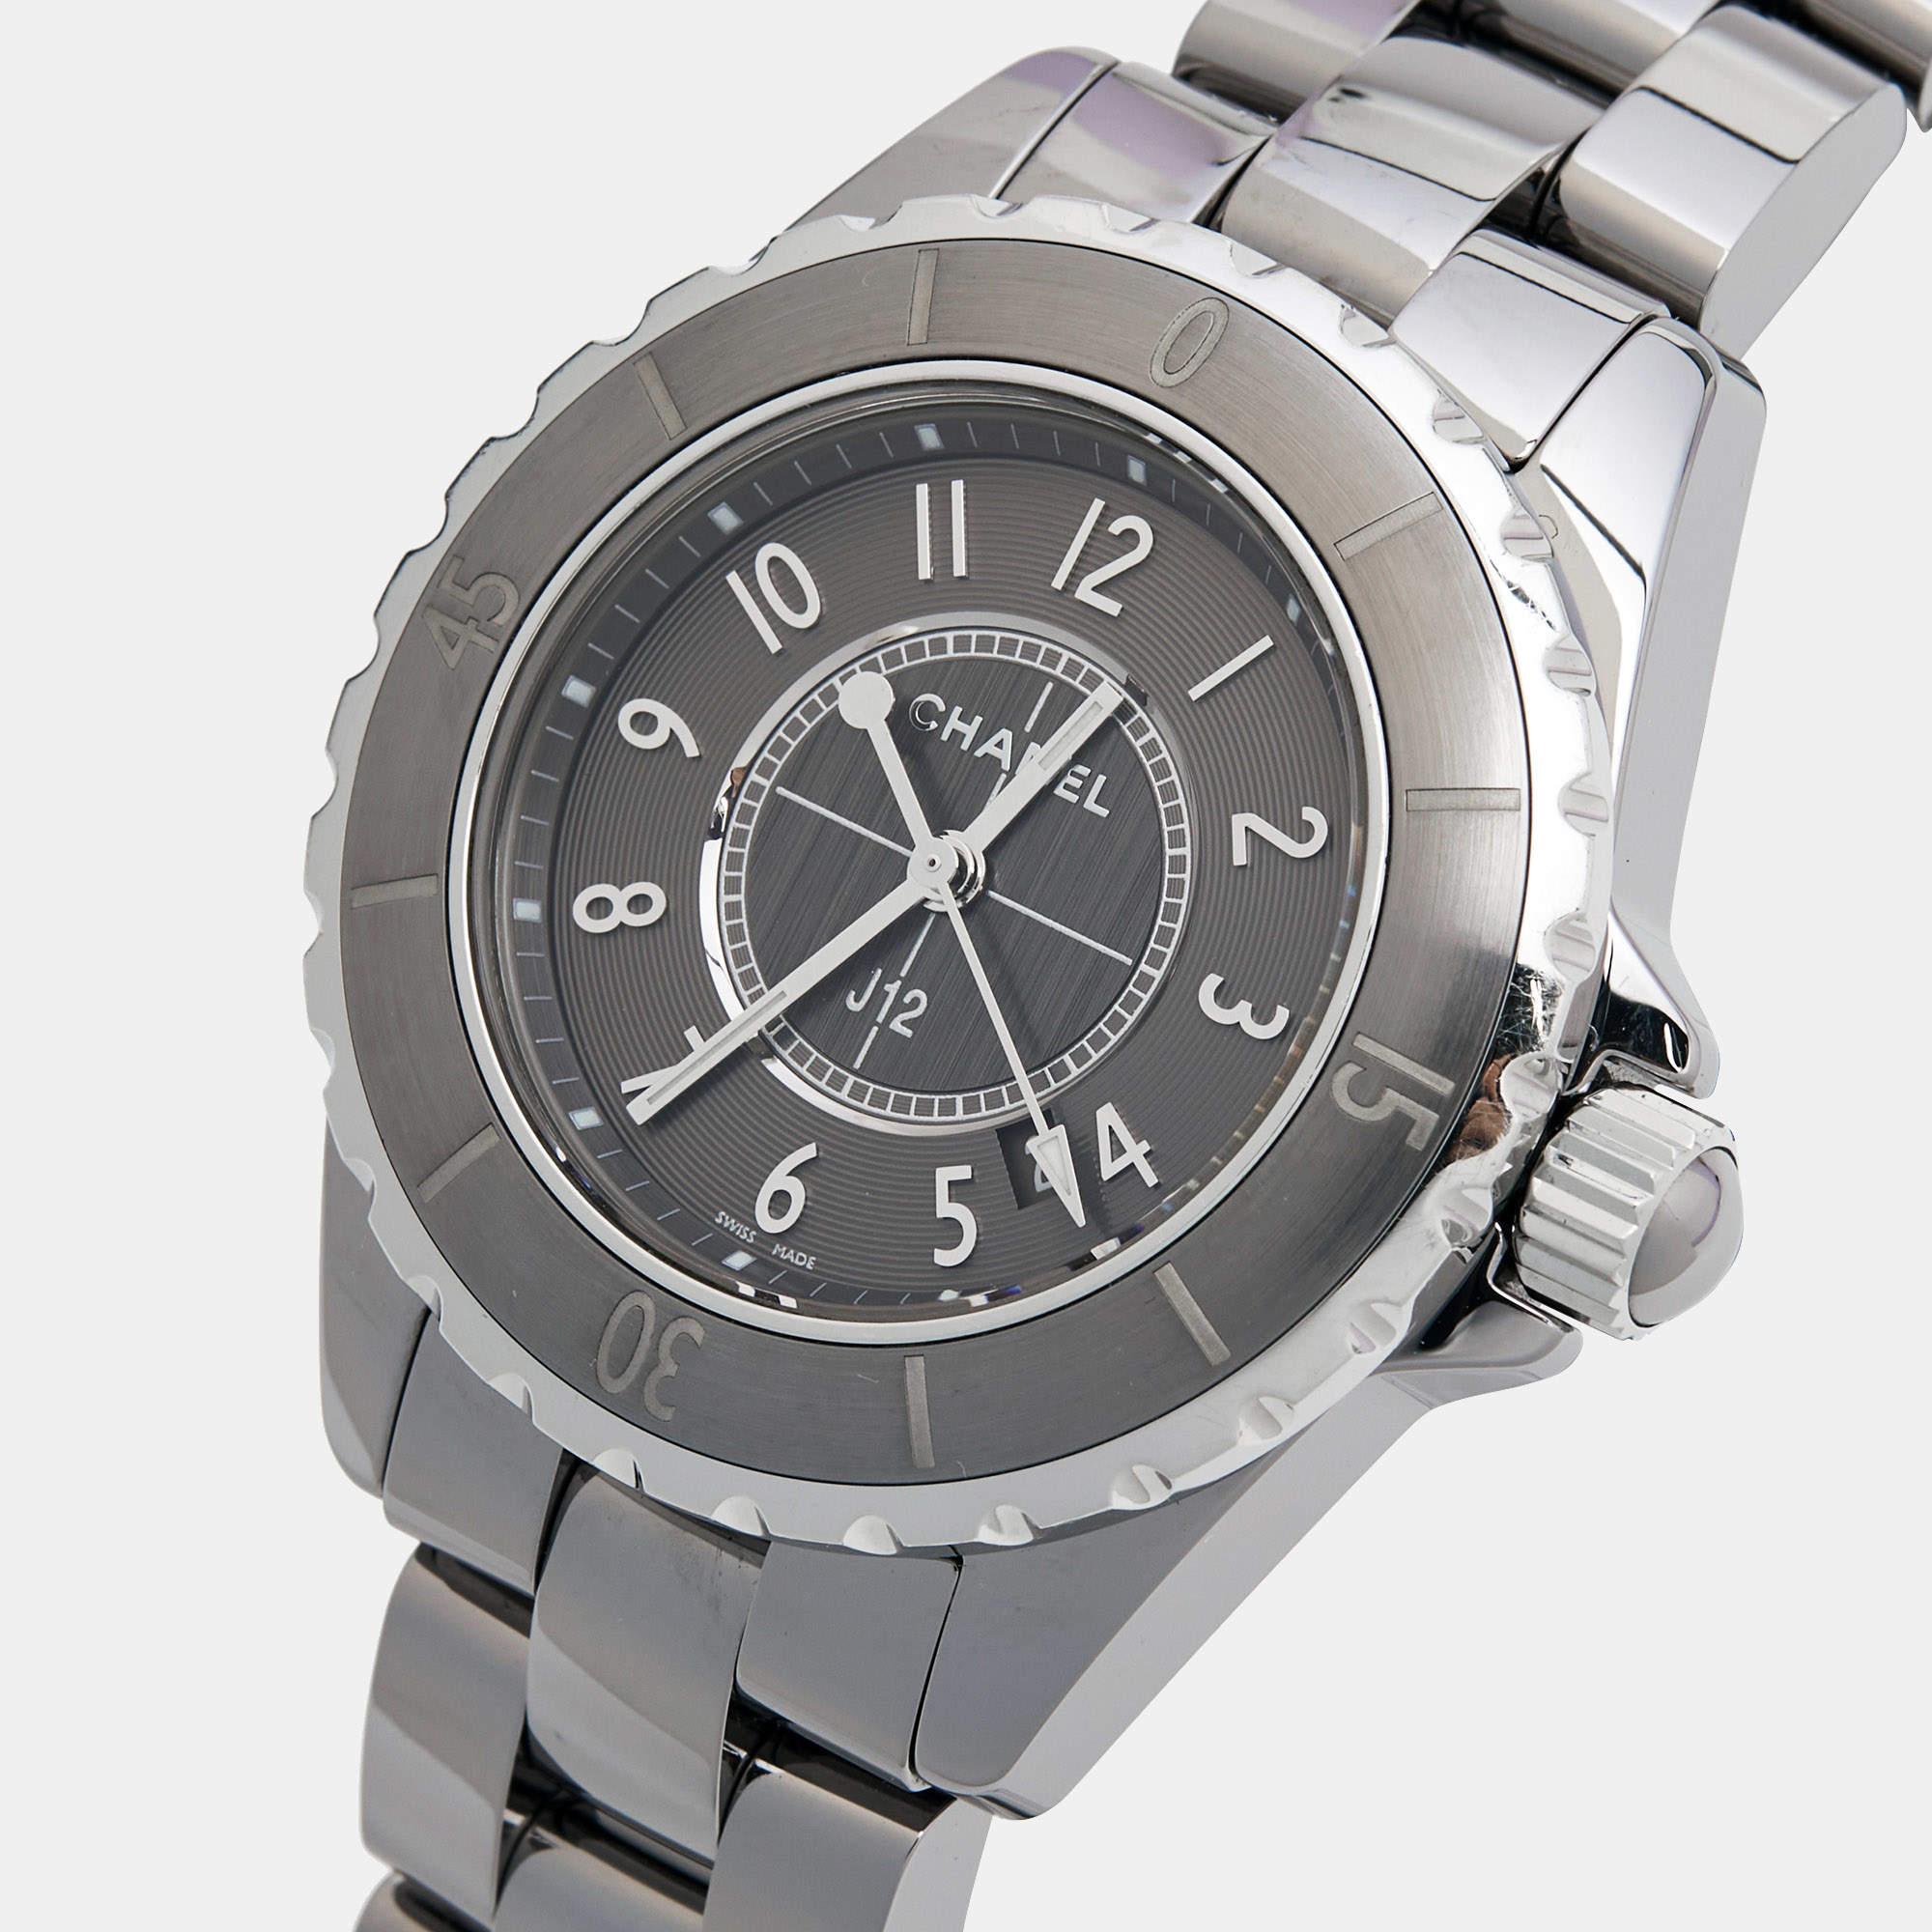 A timeless silhouette made of high-quality materials and packed with precision and luxury makes this Chanel wristwatch the perfect choice for a sophisticated finish to any look. It is a grand creation to elevate the everyday